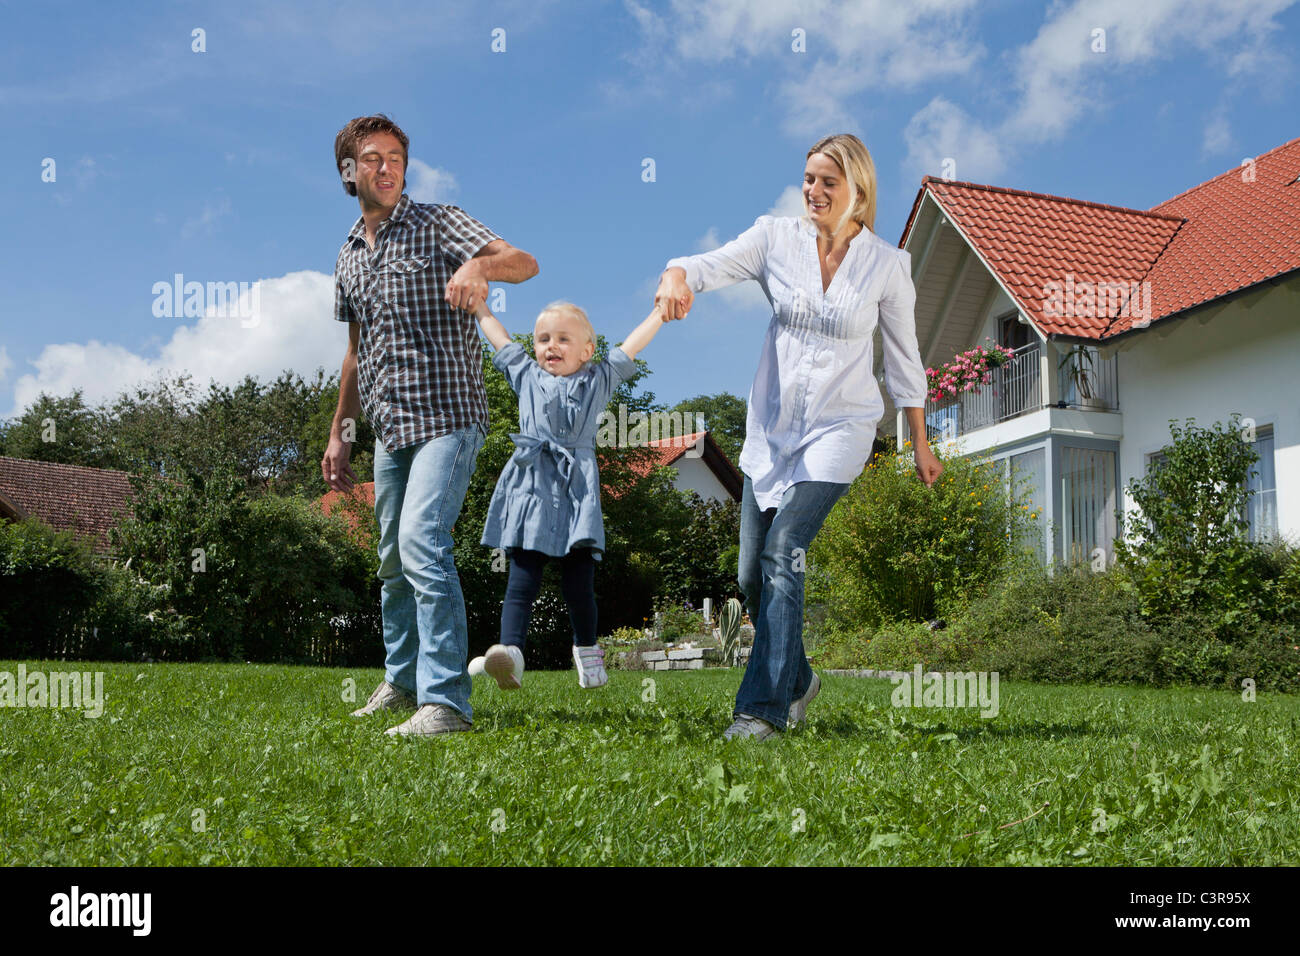 Germany, Munich, Family having fun in front of house Stock Photo